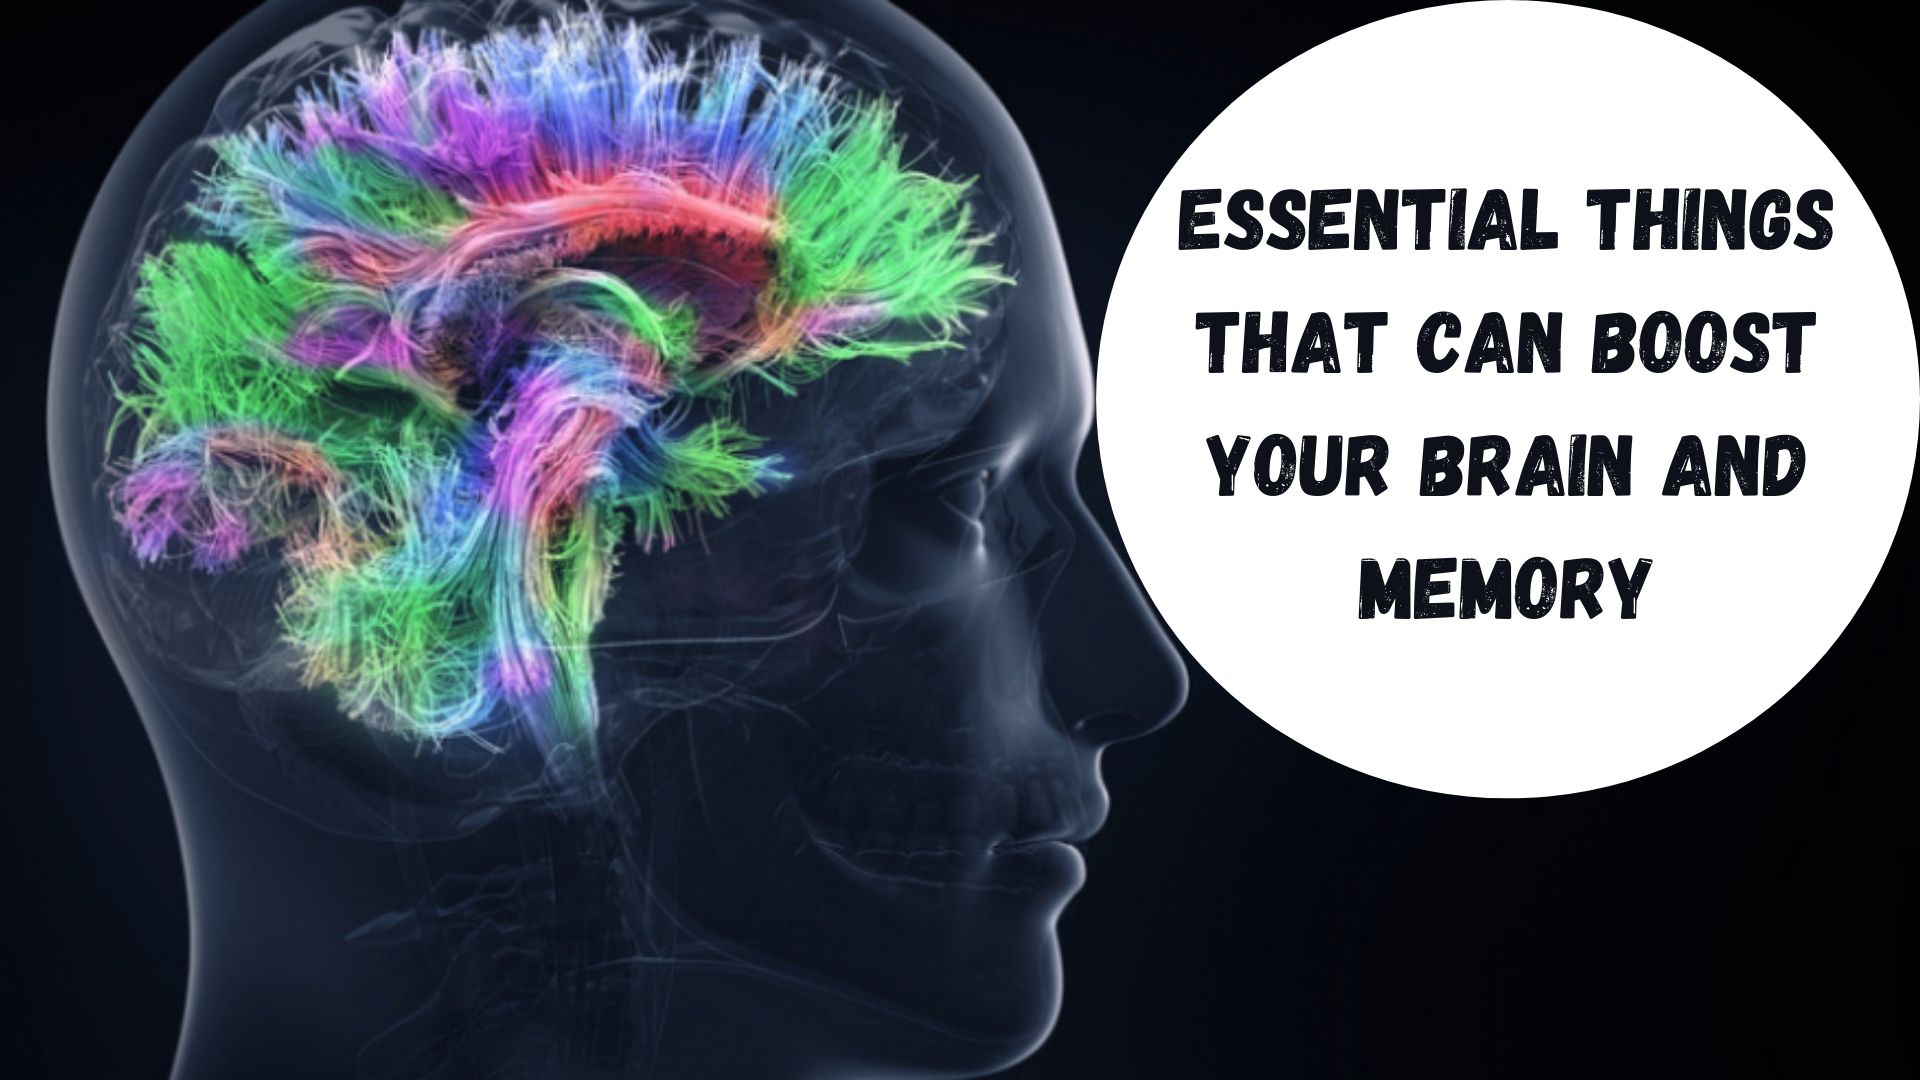 Essential Things That Can Boost Your Brain and Memory